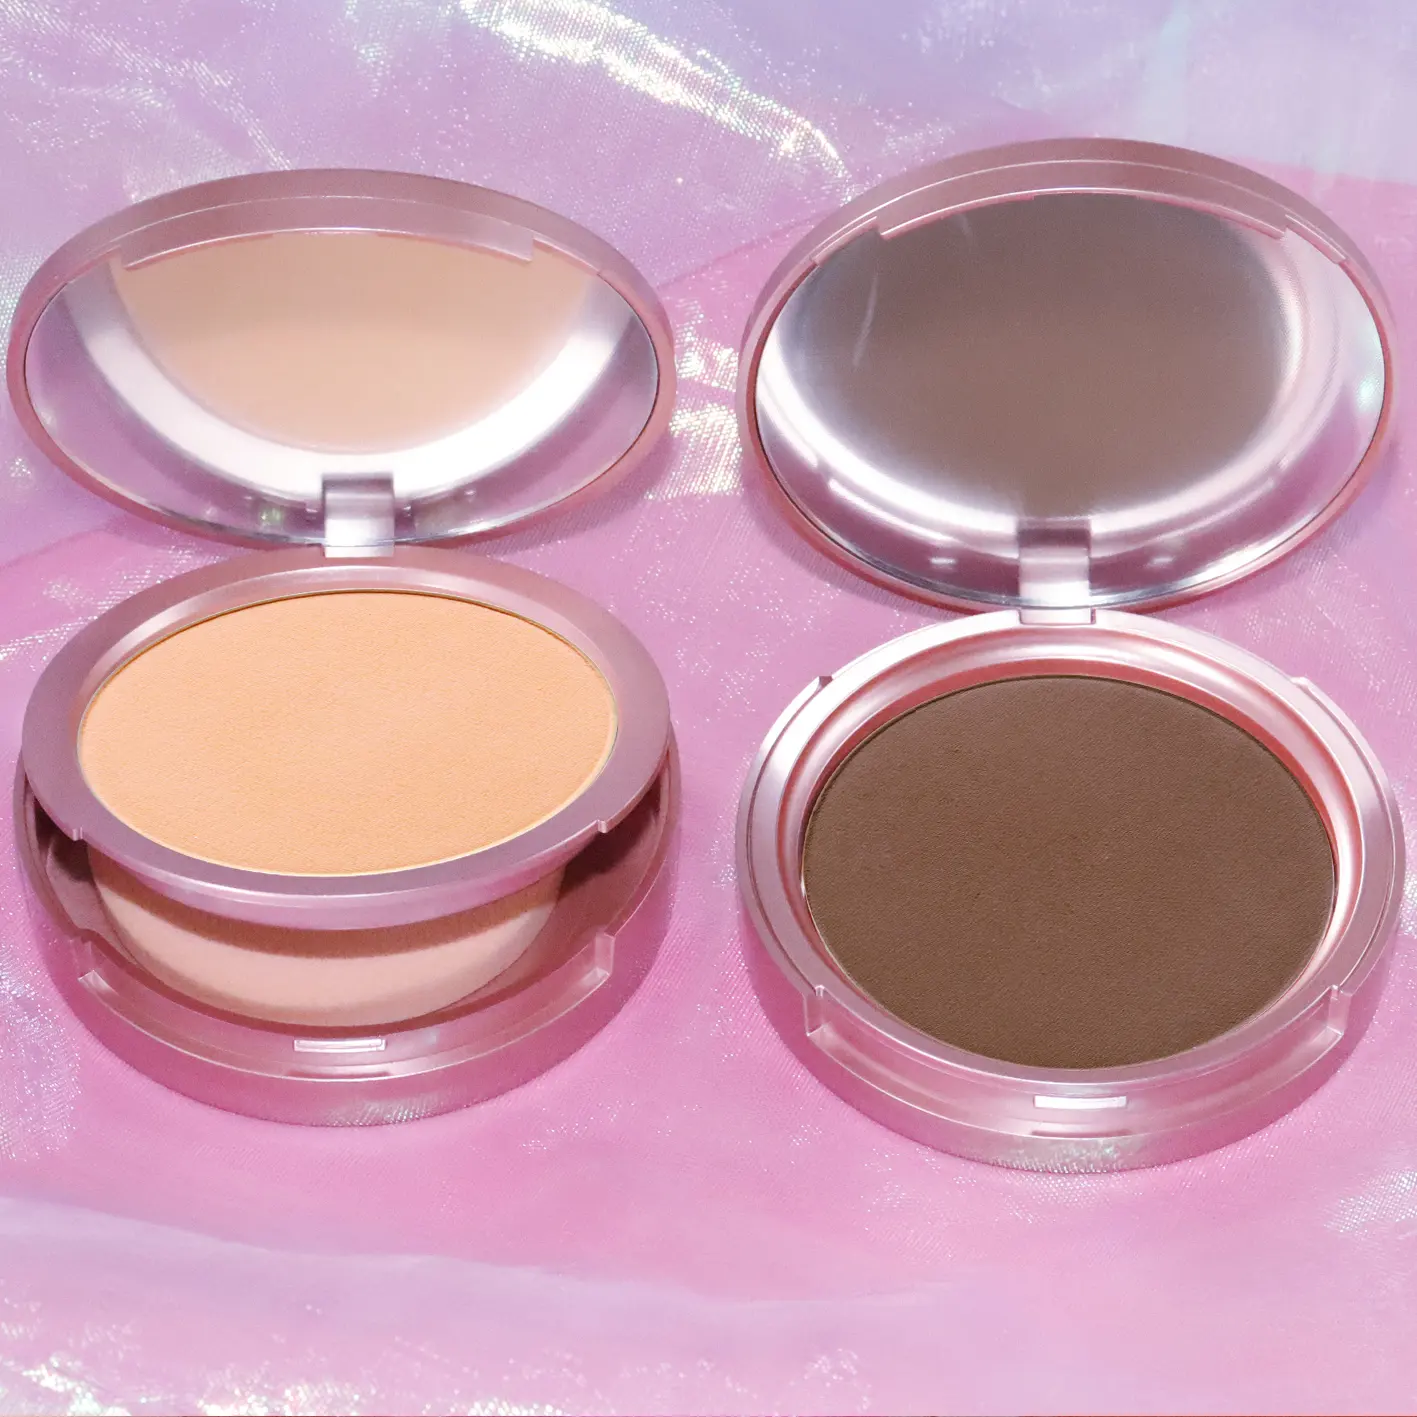 No Brand Pressed Mineral Makeup Powder Foundation with Concealer & Finishing Powder